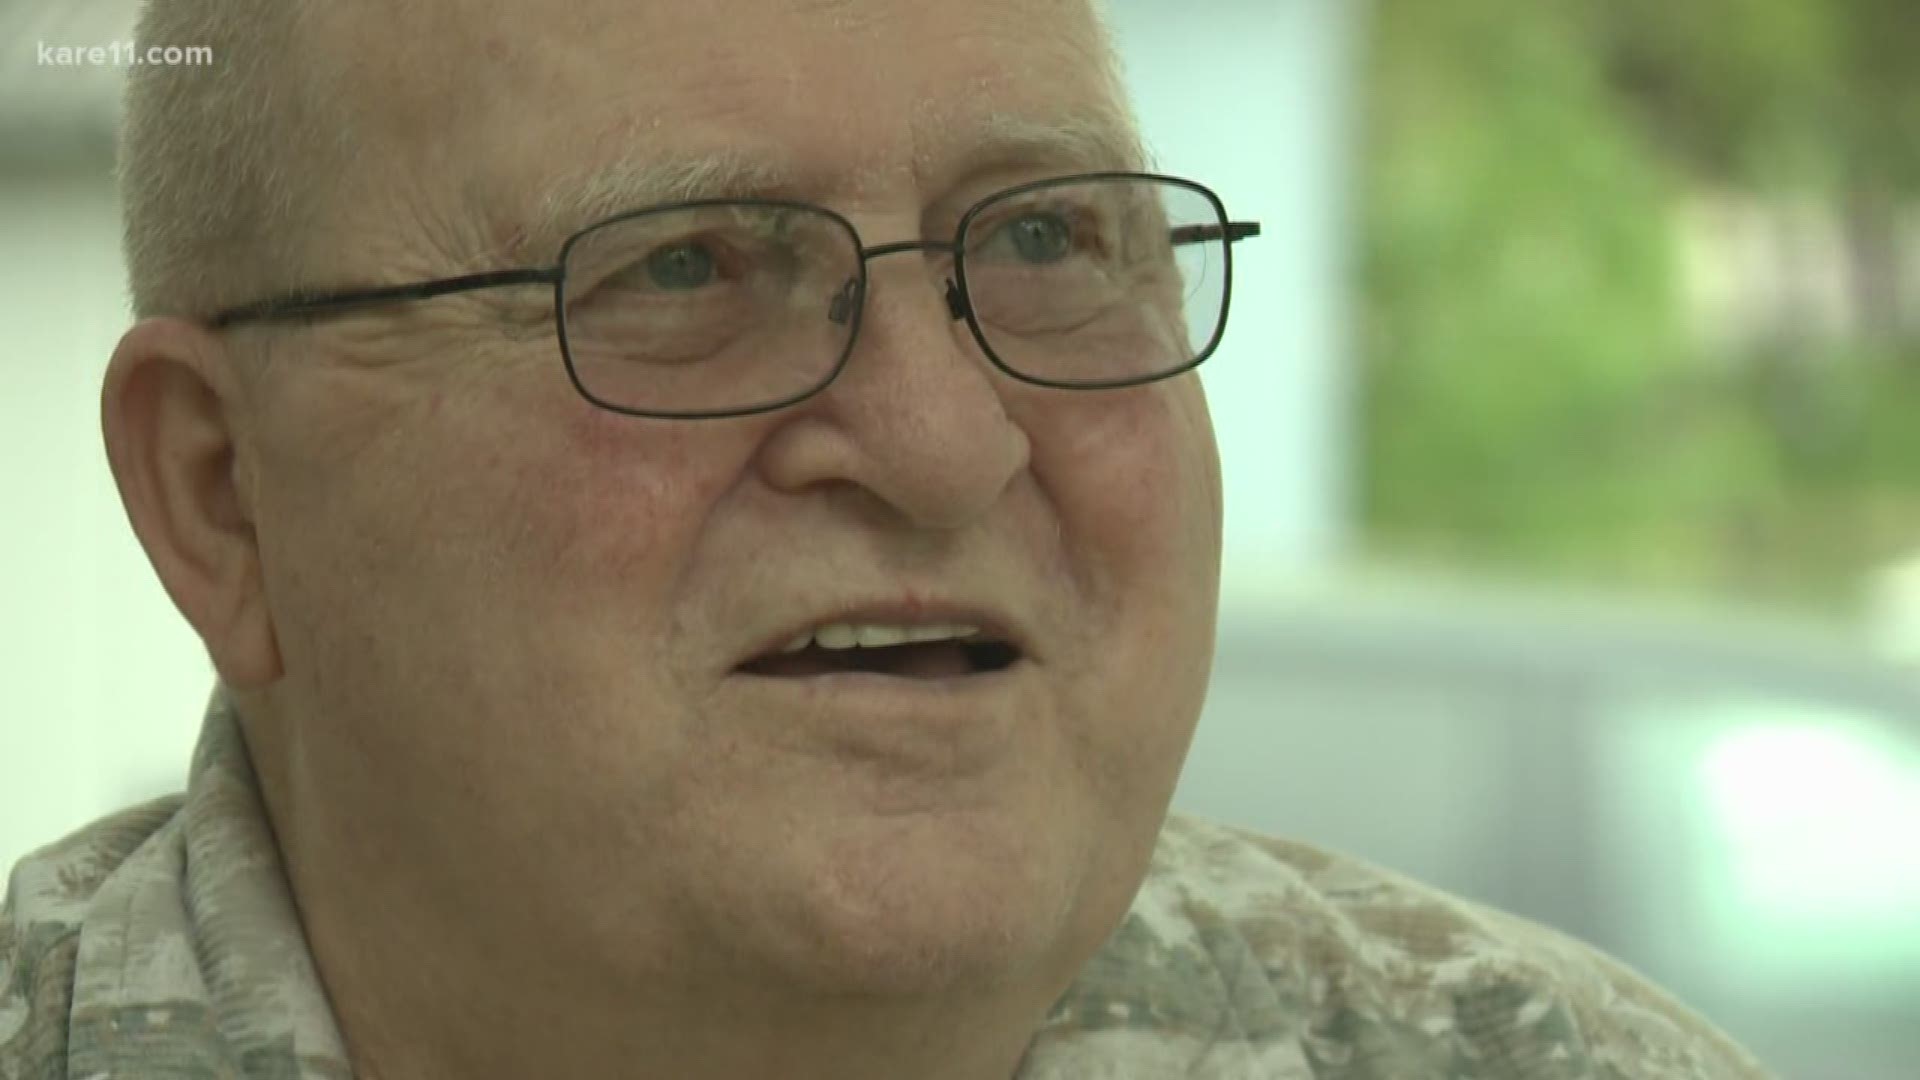 Bullied on Facebook after he attempted to sell his hearing aids for a vehicle to drive to doctor appointments, a 75-year-old Army veteran has now inspired more than $18,000 in donations. https://kare11.tv/2rXUX7Z